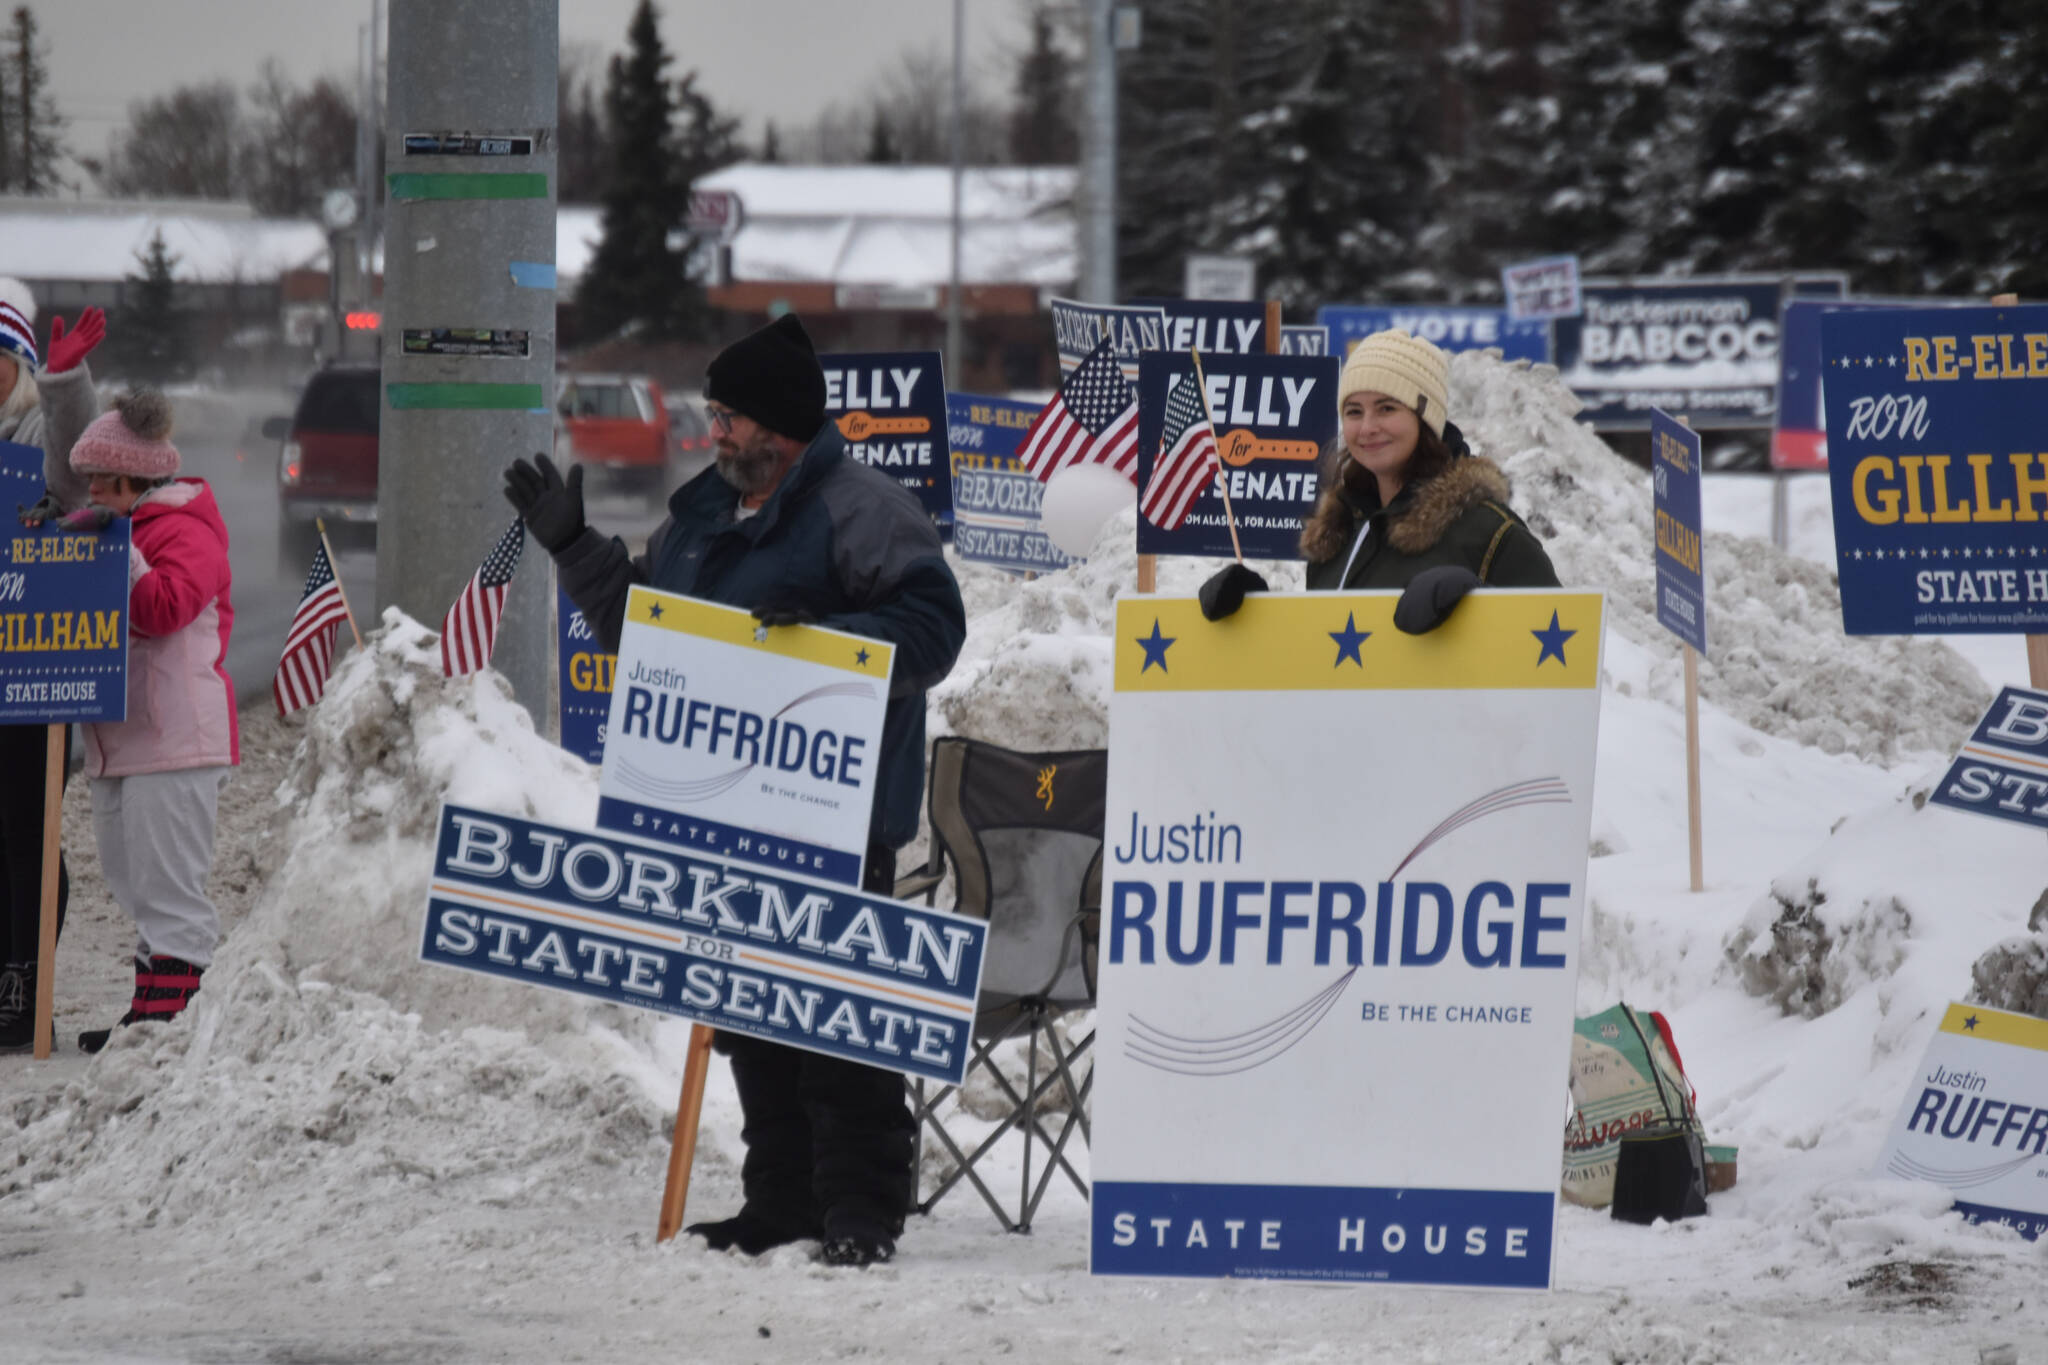 Michael O’Rourke and another supporter wave signs for Justin Ruffridge on Election Day, Nov. 8, 2022 in Kenai, Alaska. (Jake Dye/Peninsula Clarion)